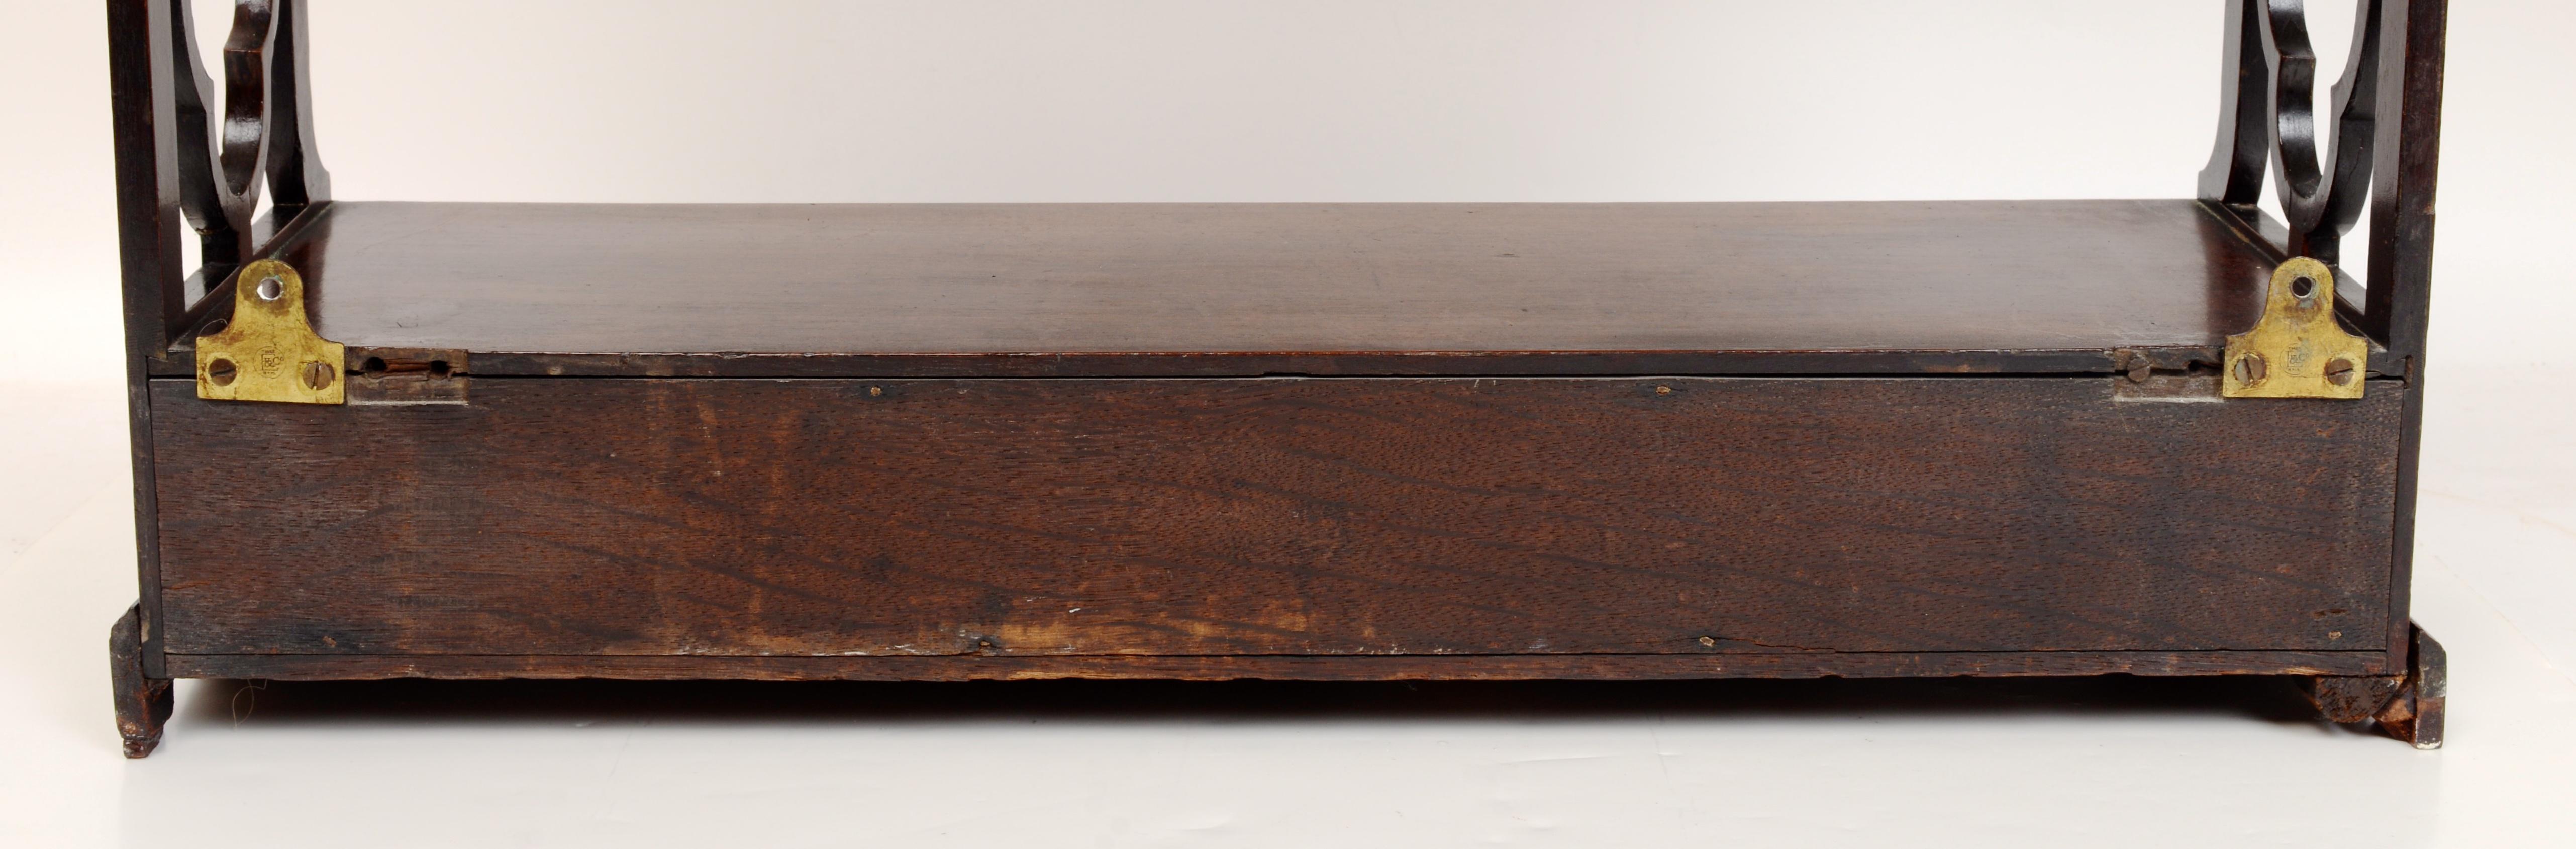 Geo III Mahogany 2 Drawer Wall Shelf, C1785 In Good Condition For Sale In valatie, NY